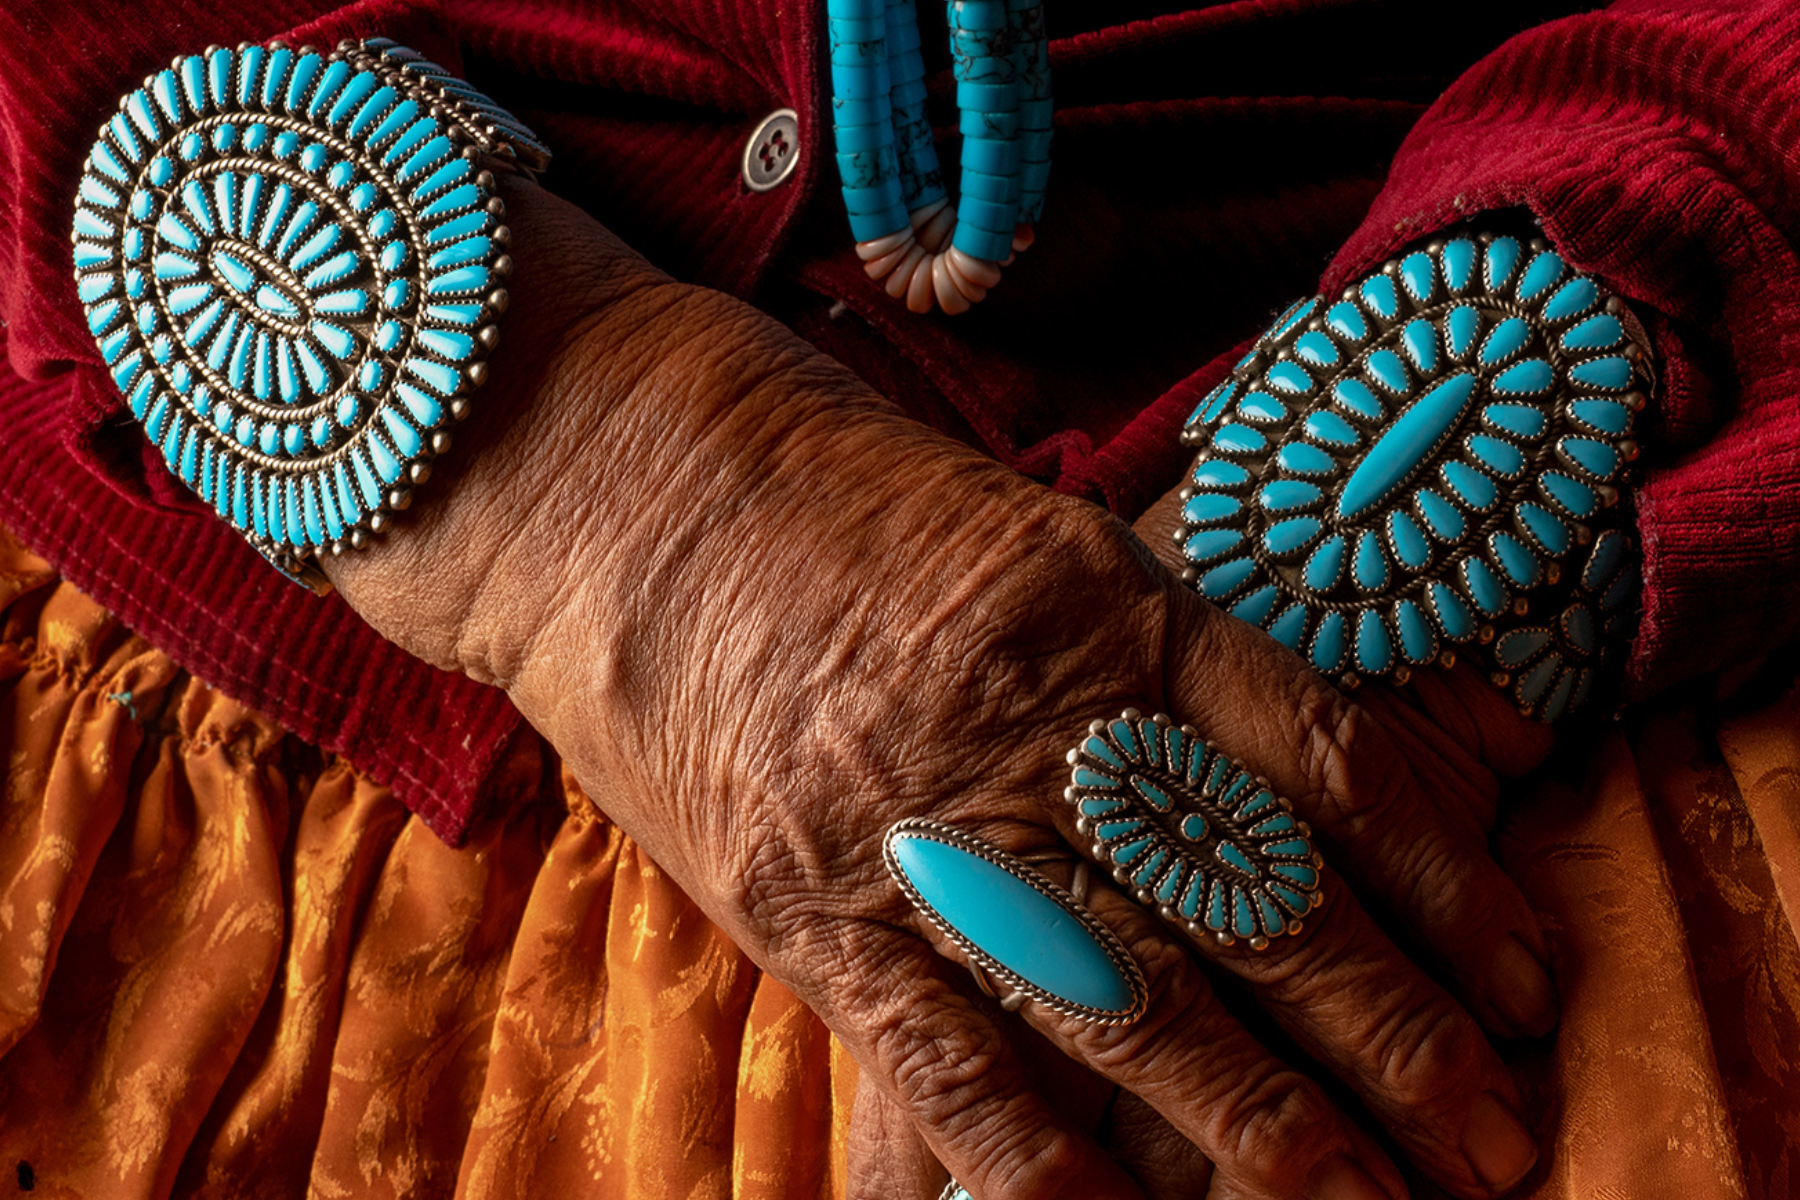 An elderly woman's hand, adorned with turquoise jewelry